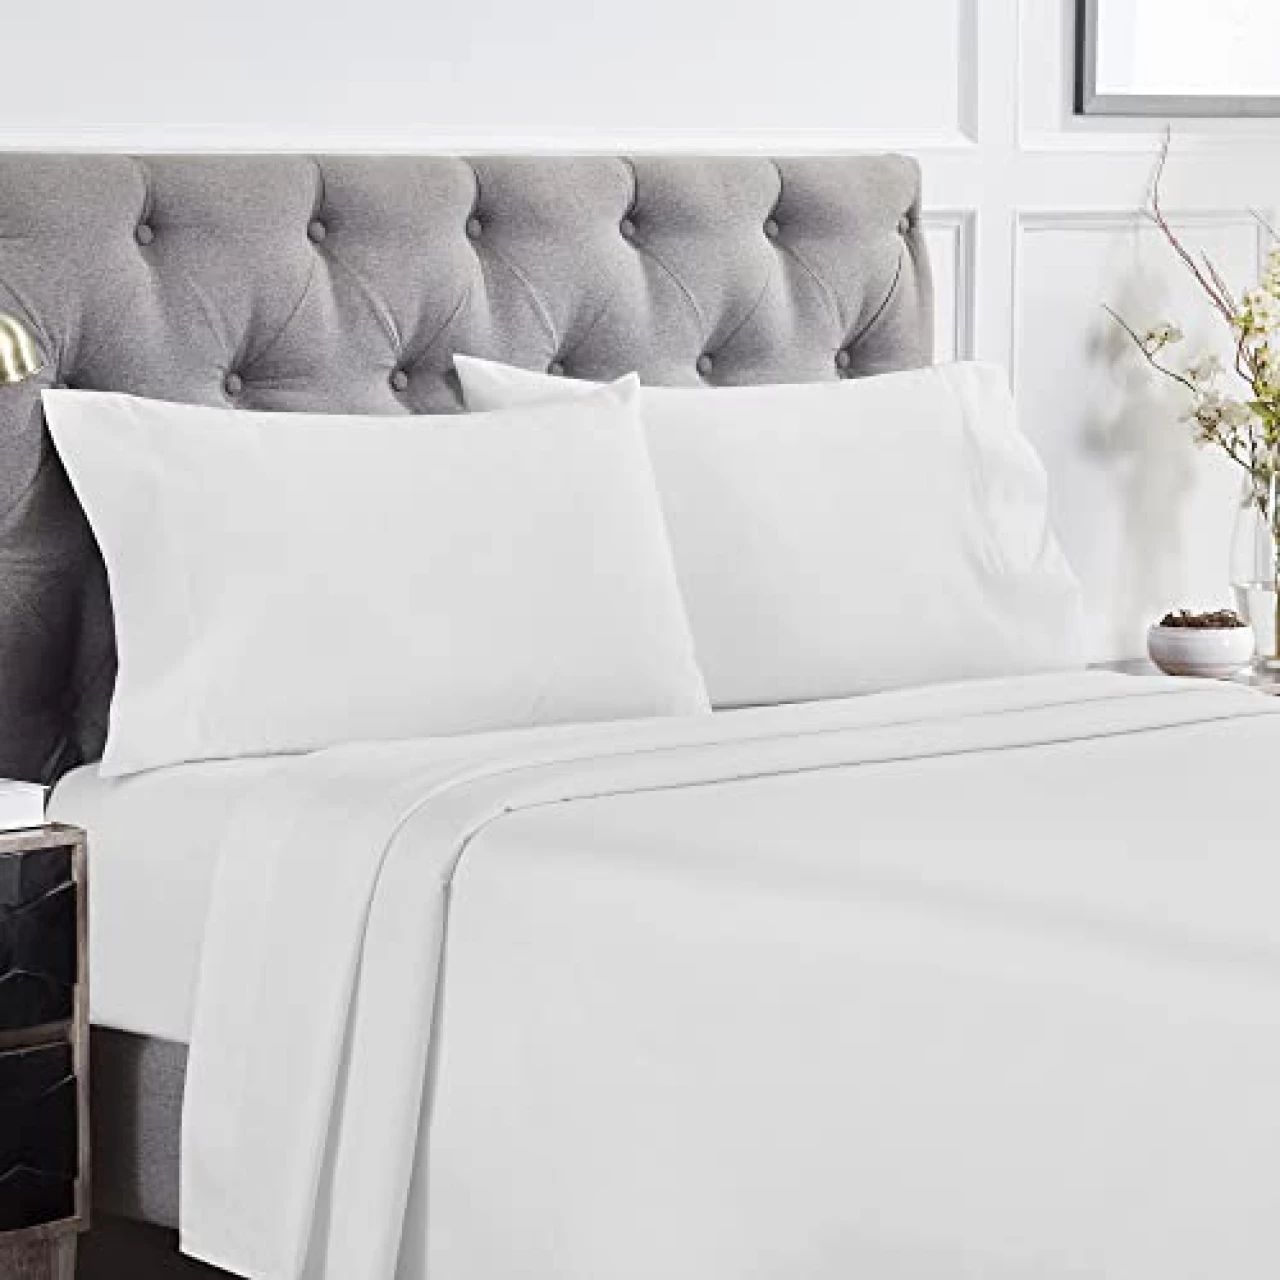 California Design Den Luxury 4 Piece King Size Sheet Set - 1000 Thread Count, 100% Cotton Sateen, Deep Pocket Fitted and Flat Sheets, Includes Pillowcase Set, Soft and Thick Cotton - Bright White